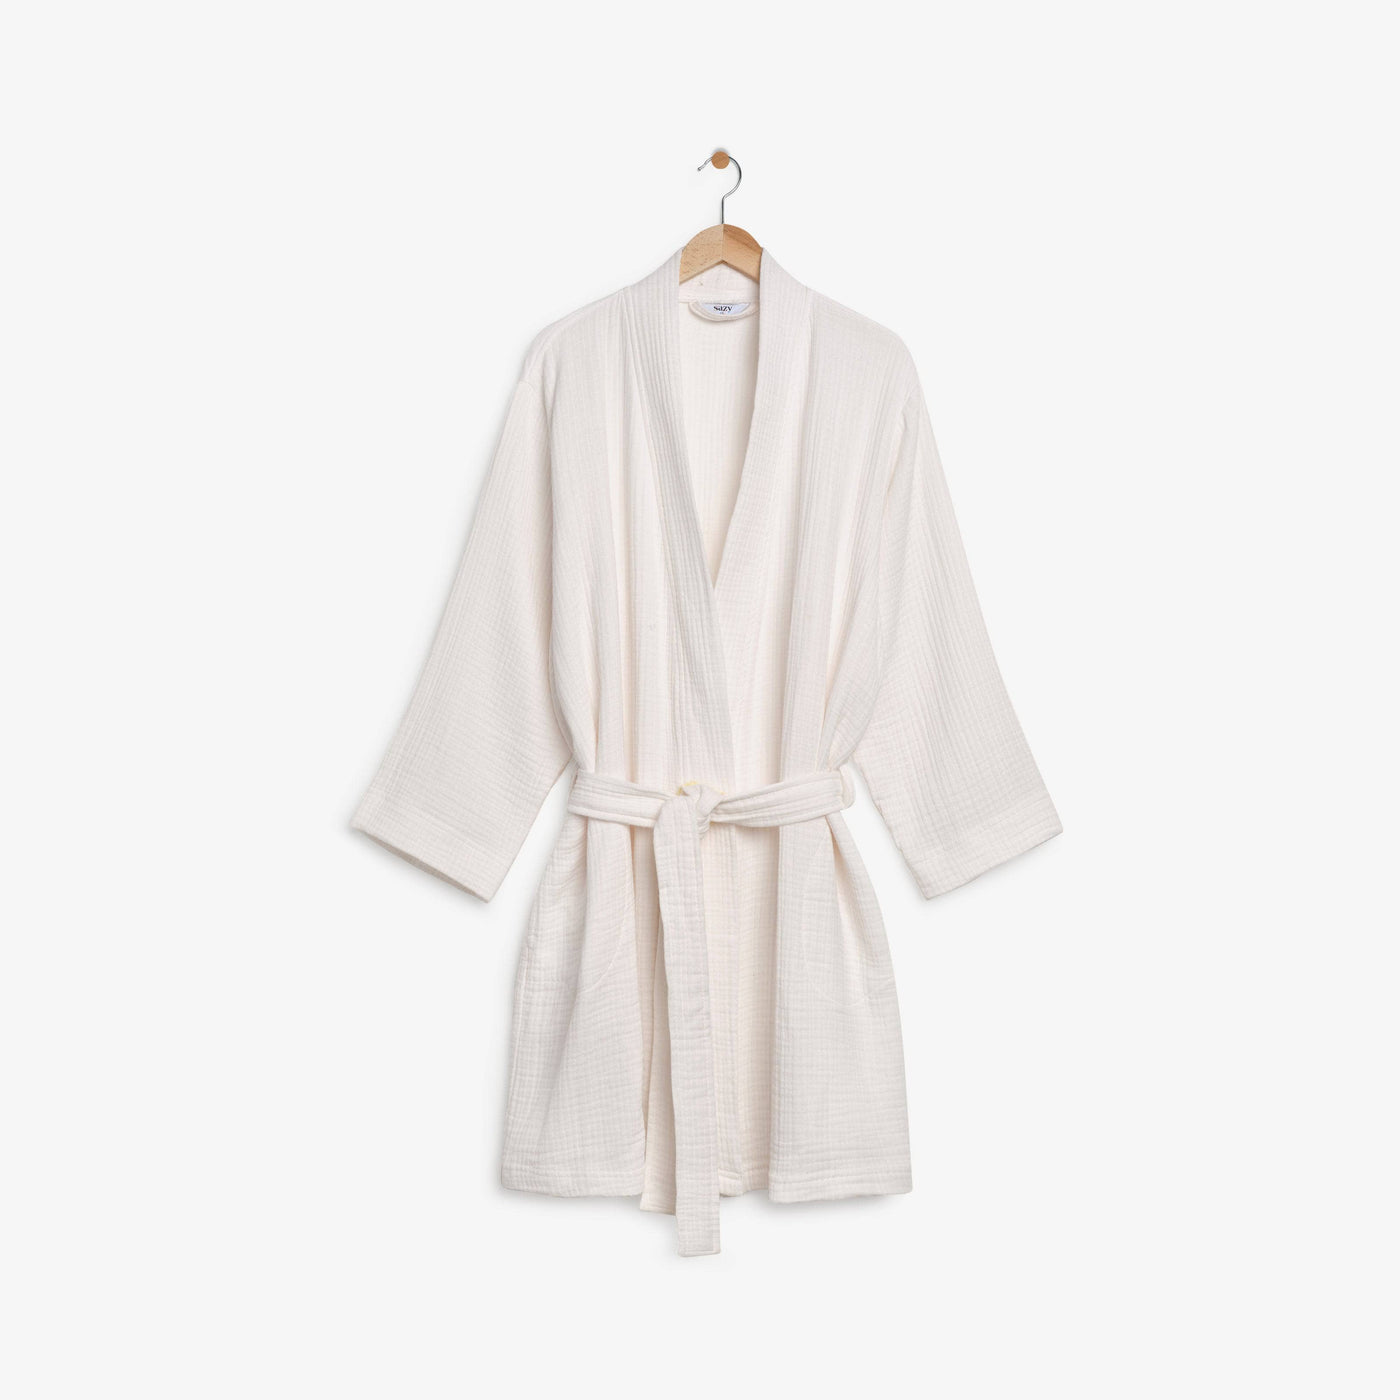 Rika Unisex 100% Turkish Cotton Dressing Gown, Off-White, XL Dressing Gowns sazy.com